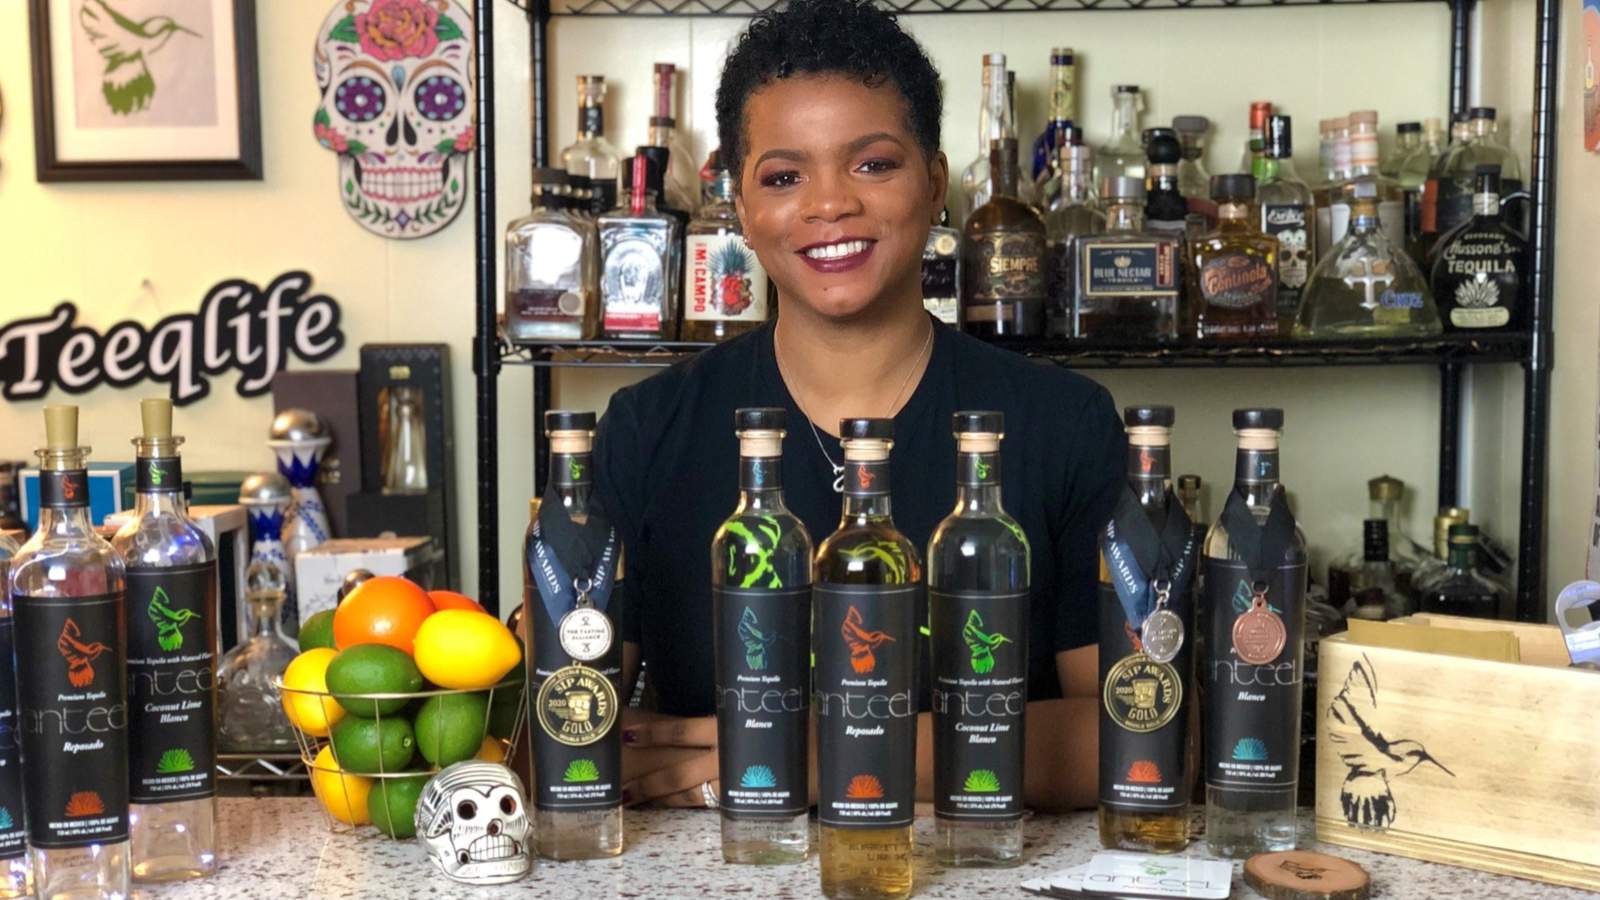 How she became the first black woman to own a Tequila company